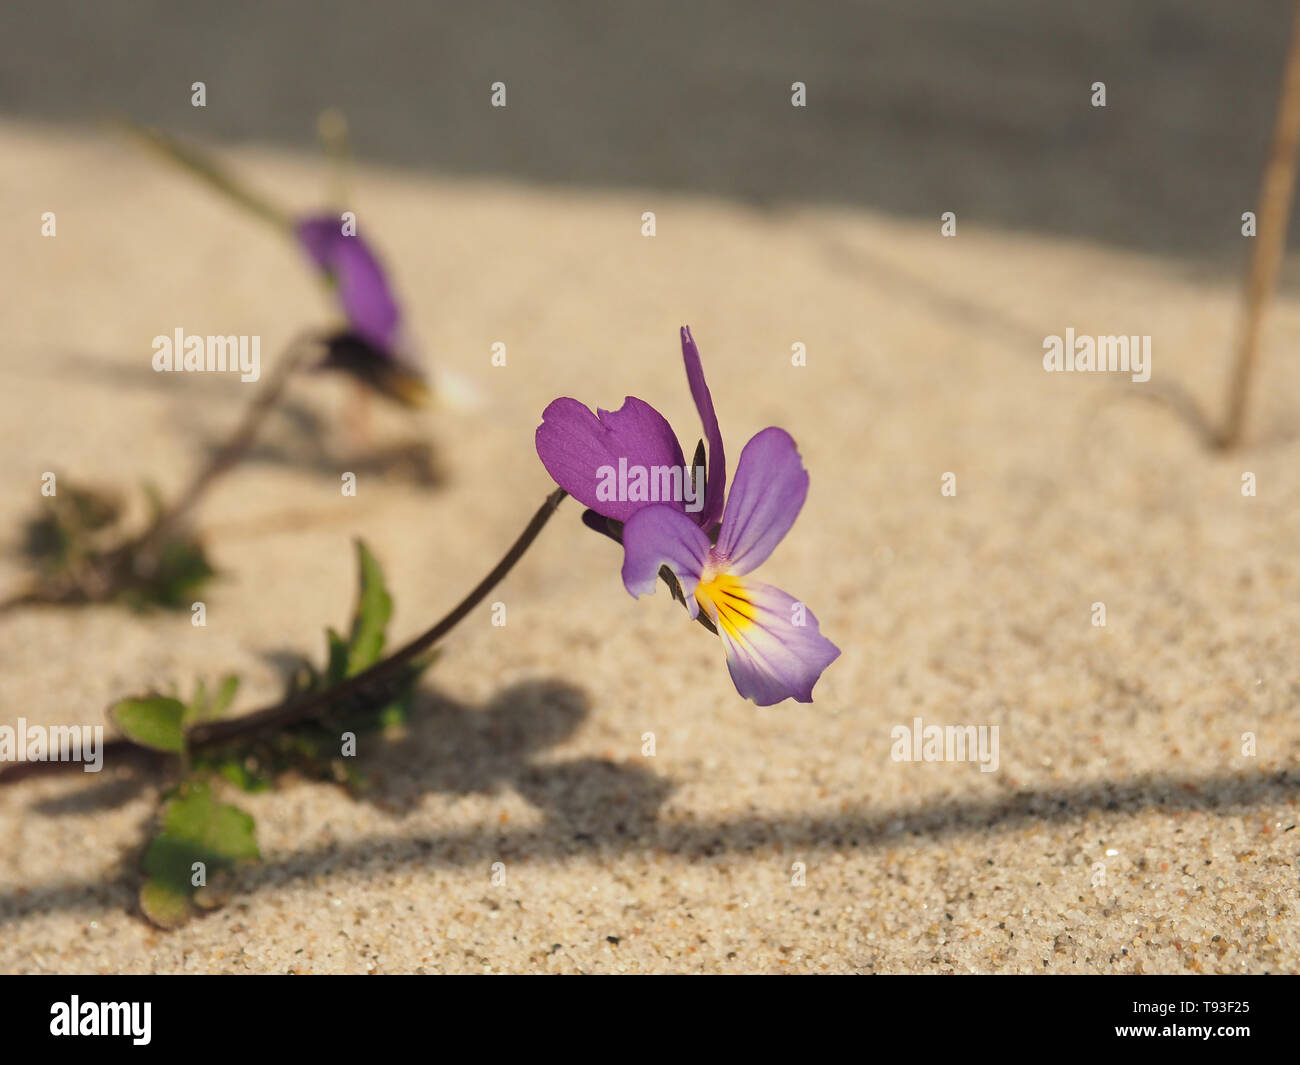 Viola tricolor curtisii, Endangered plant species in the dune Stock Photo